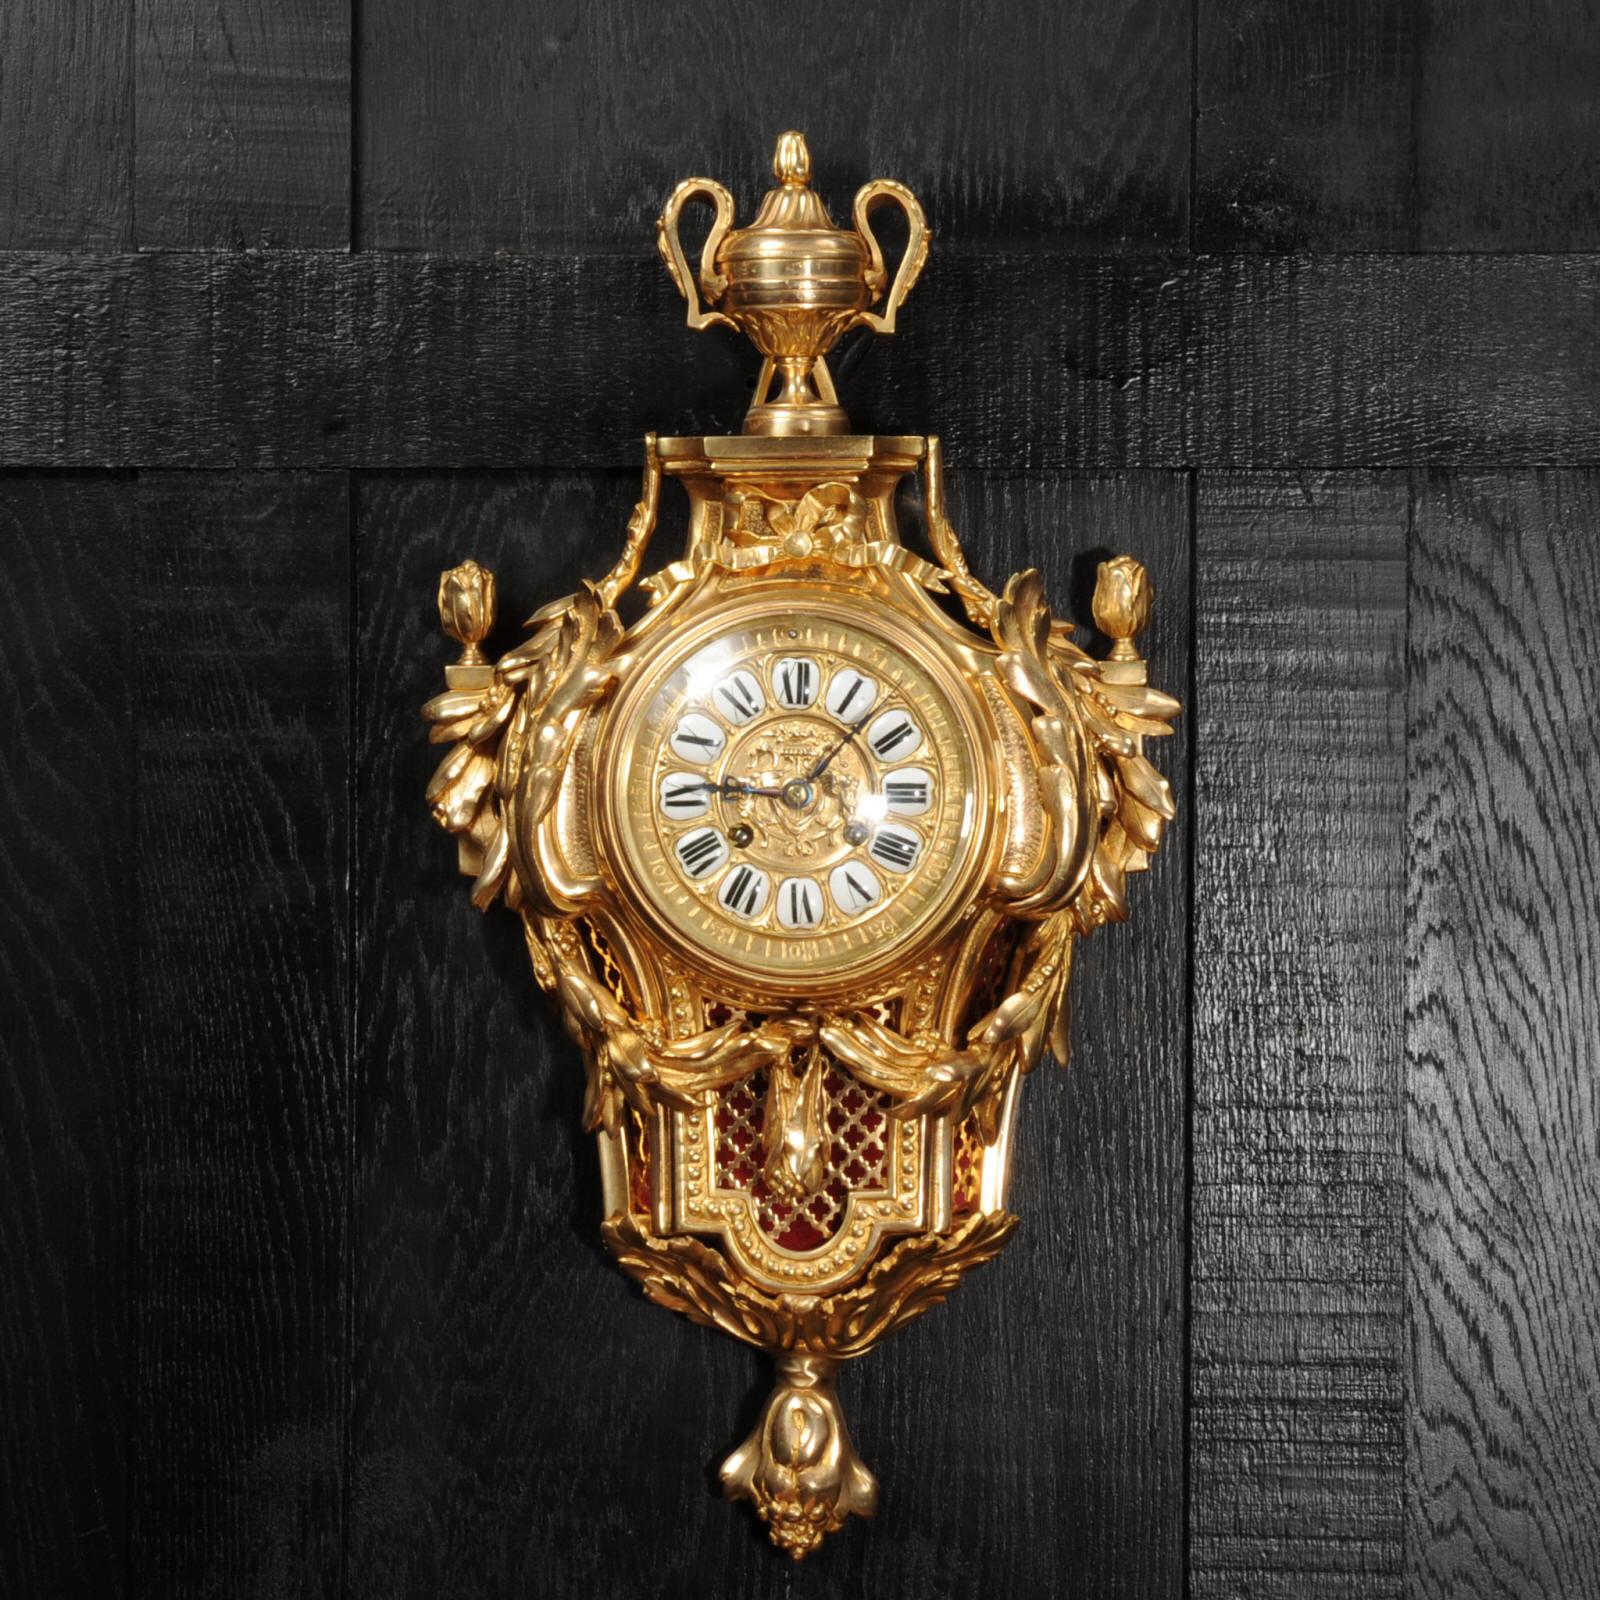 A very elegant cartel clock, Louis XVI in design with a handled urn and acanthus decoration. A large bow sits above the dial, and sound panels to the sides and front allow the delicate sound of the bell strike to be heard. It is finely made in